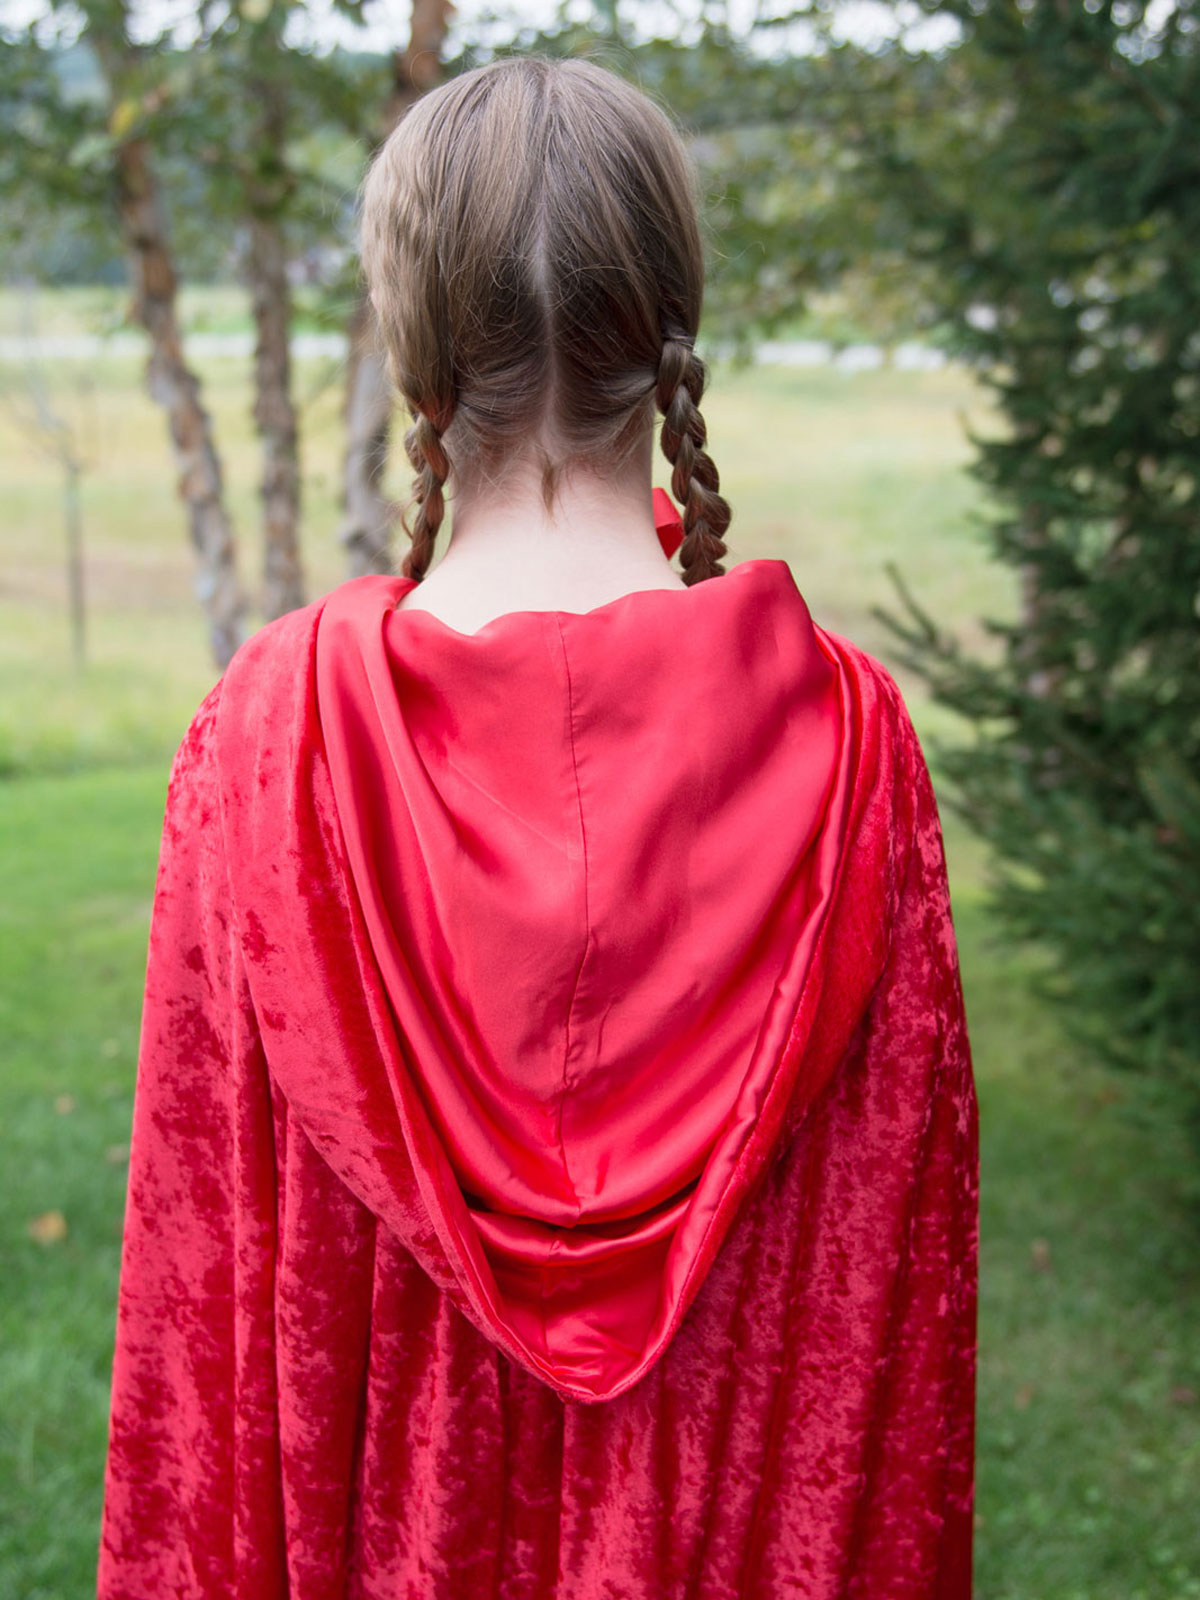 How to make a Hooded Cape for Halloween | WeAllSew